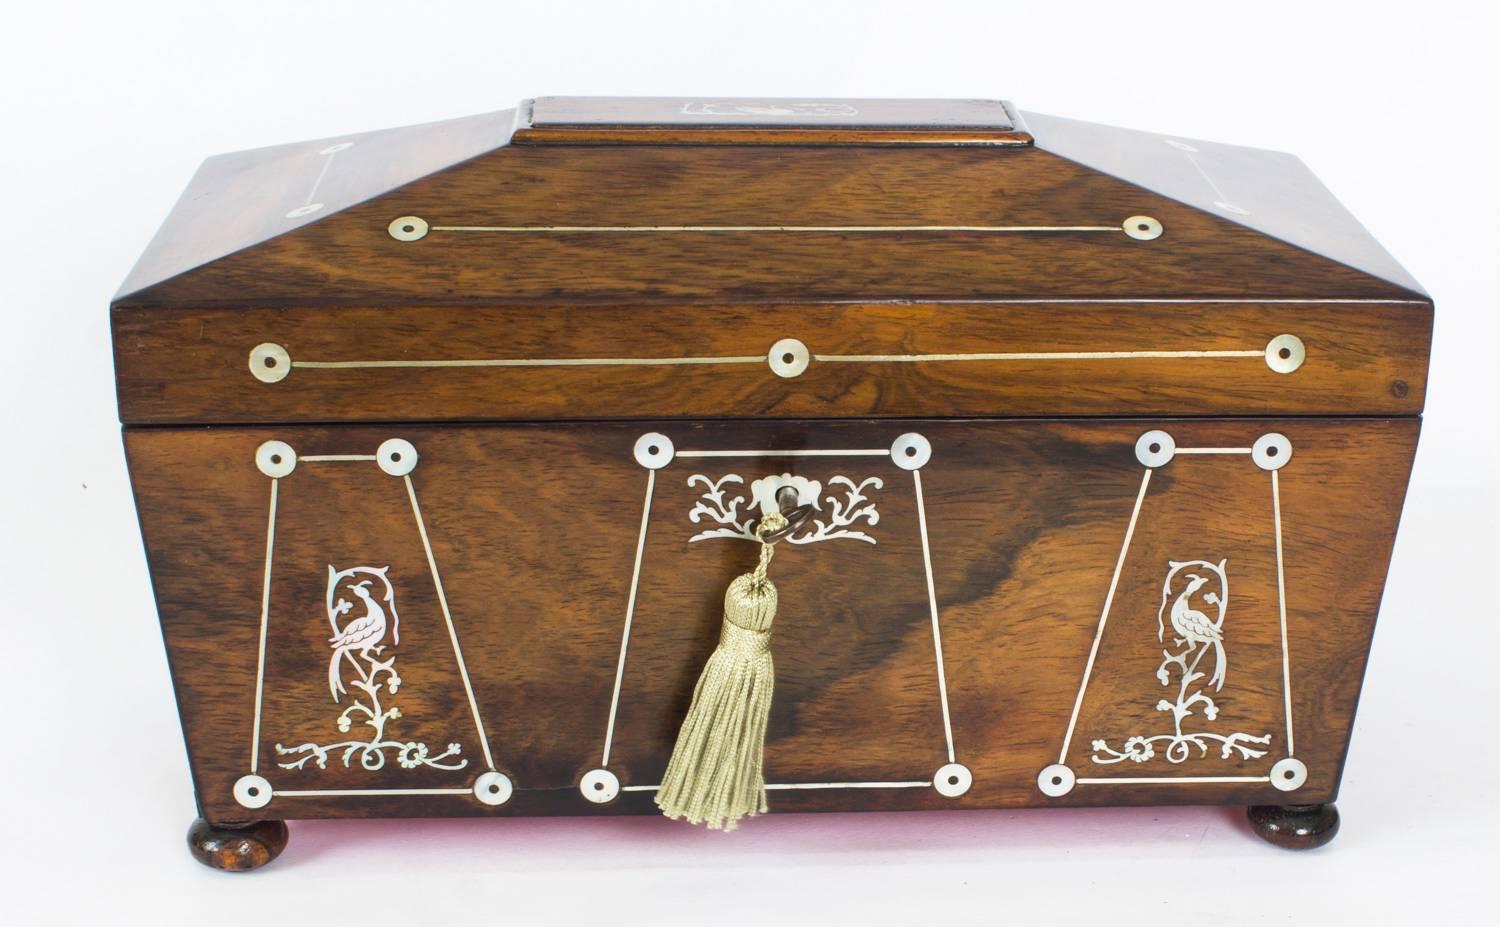 Antique Regency Rosewood and Mother-of-Pearl Inlaid Casket, 19th Century 1